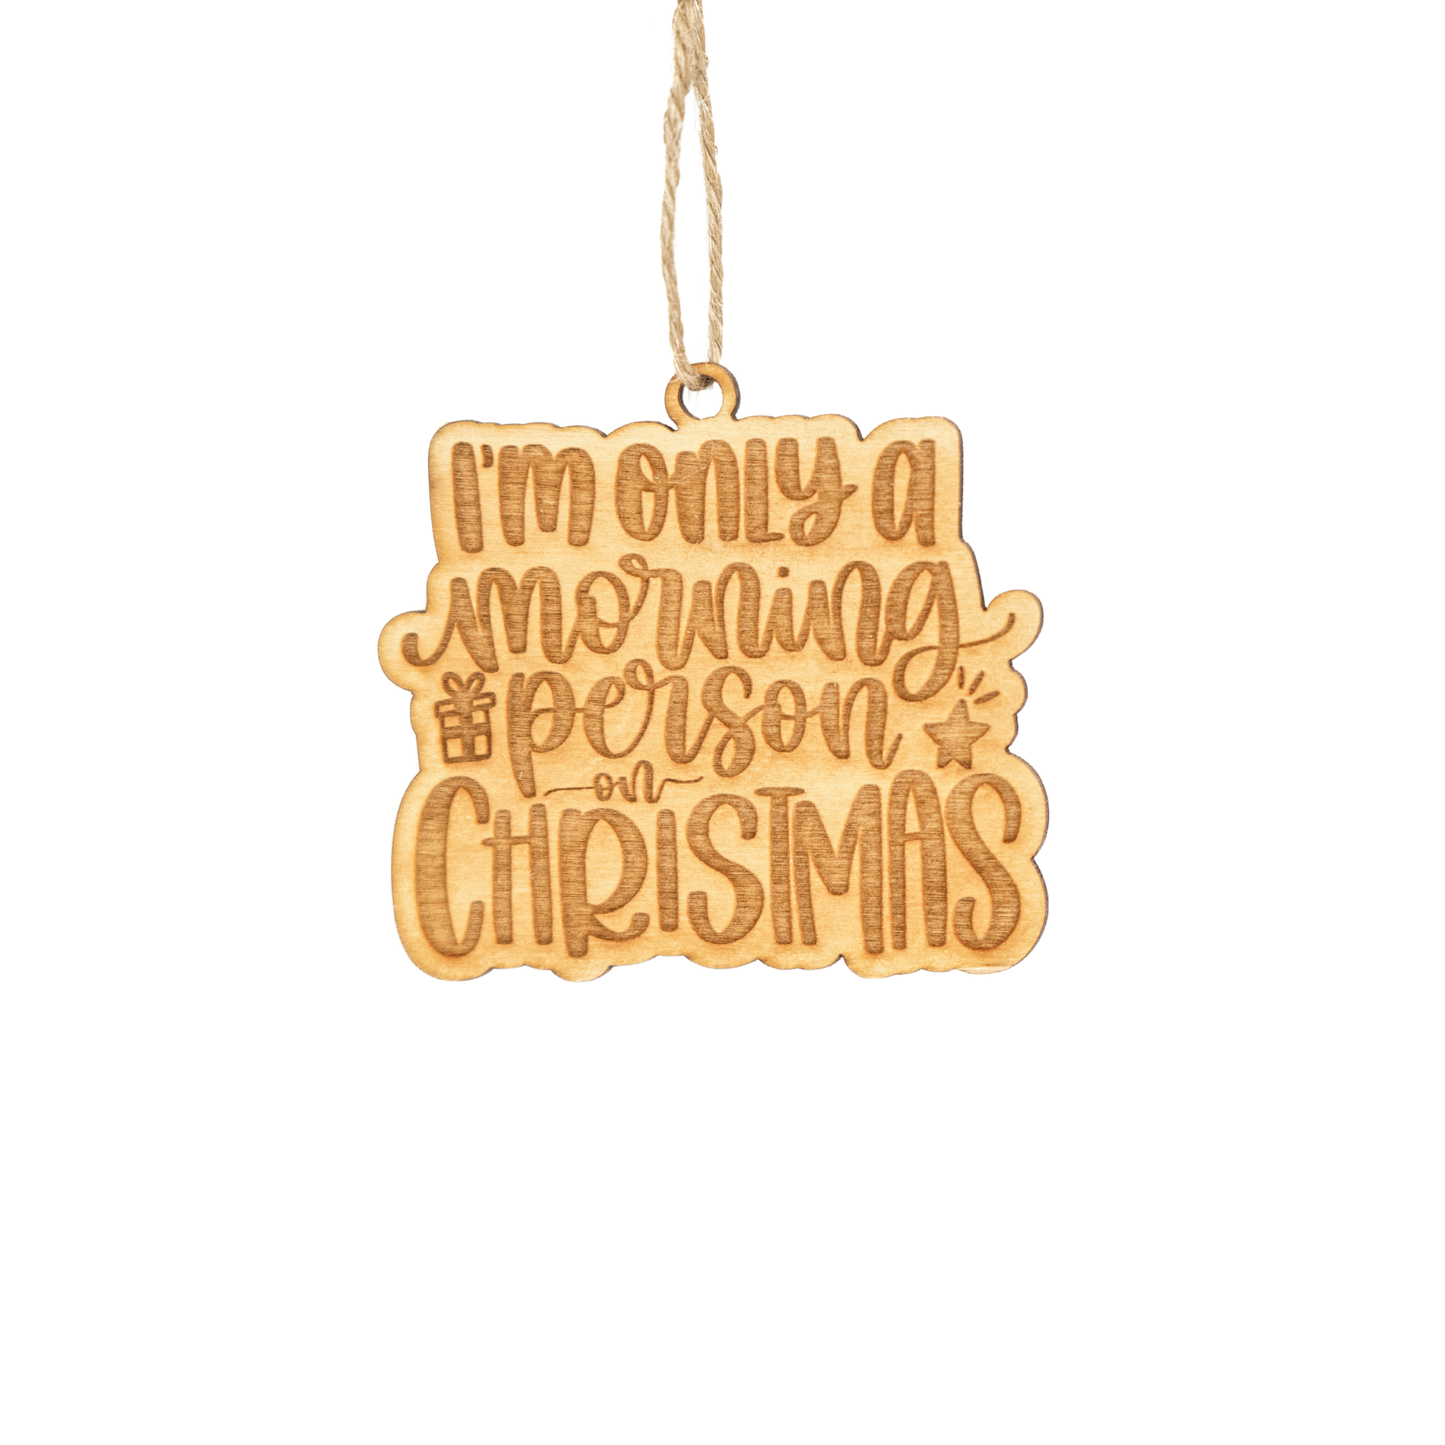 I'm Only A Morning Person On Christmas - Sarcastic Christmas Ornament